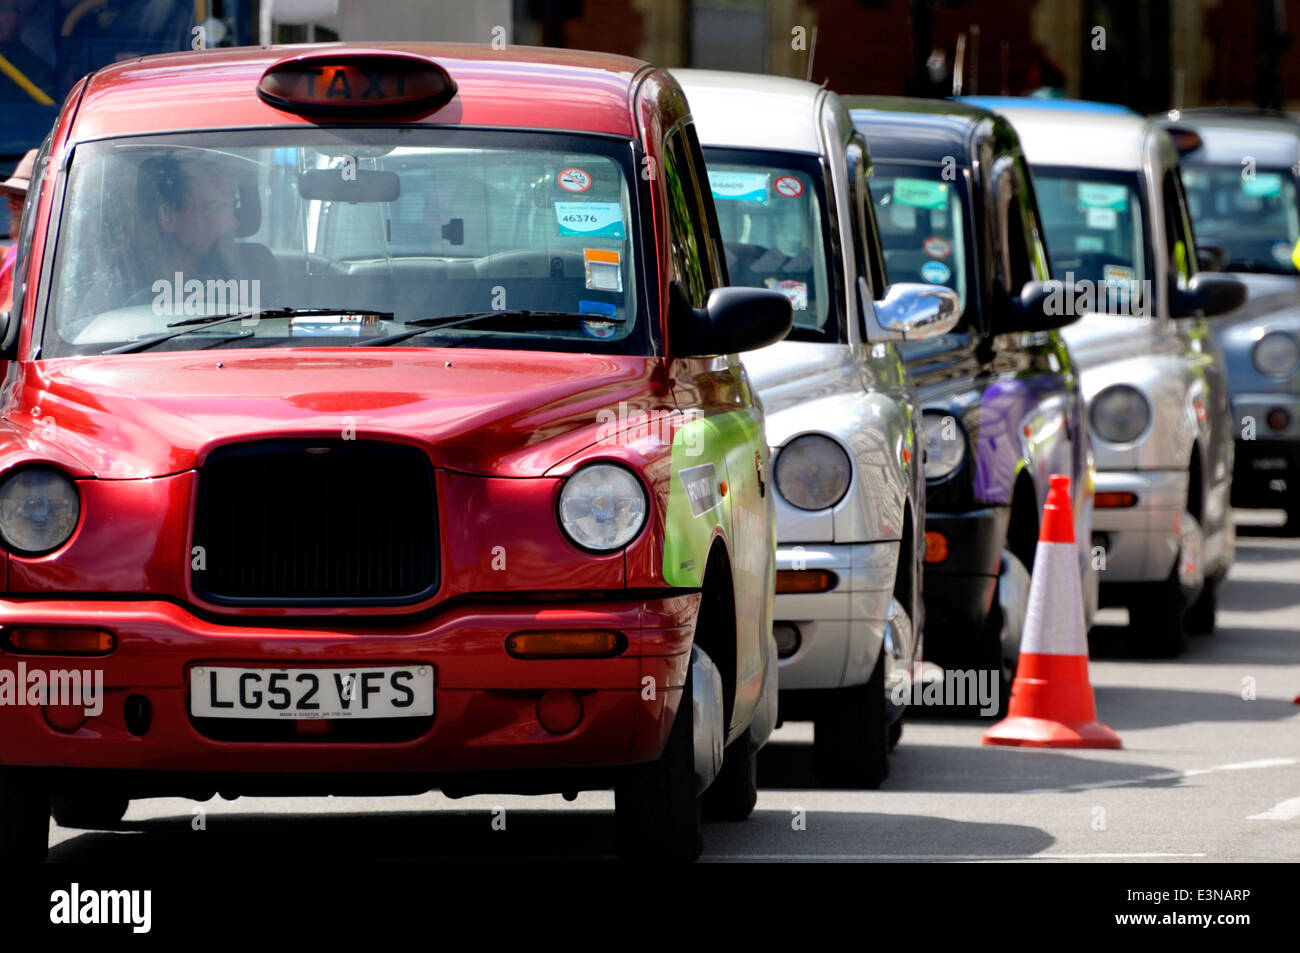 London, England, UK. Line of London taxis, black, white and red Stock Photo